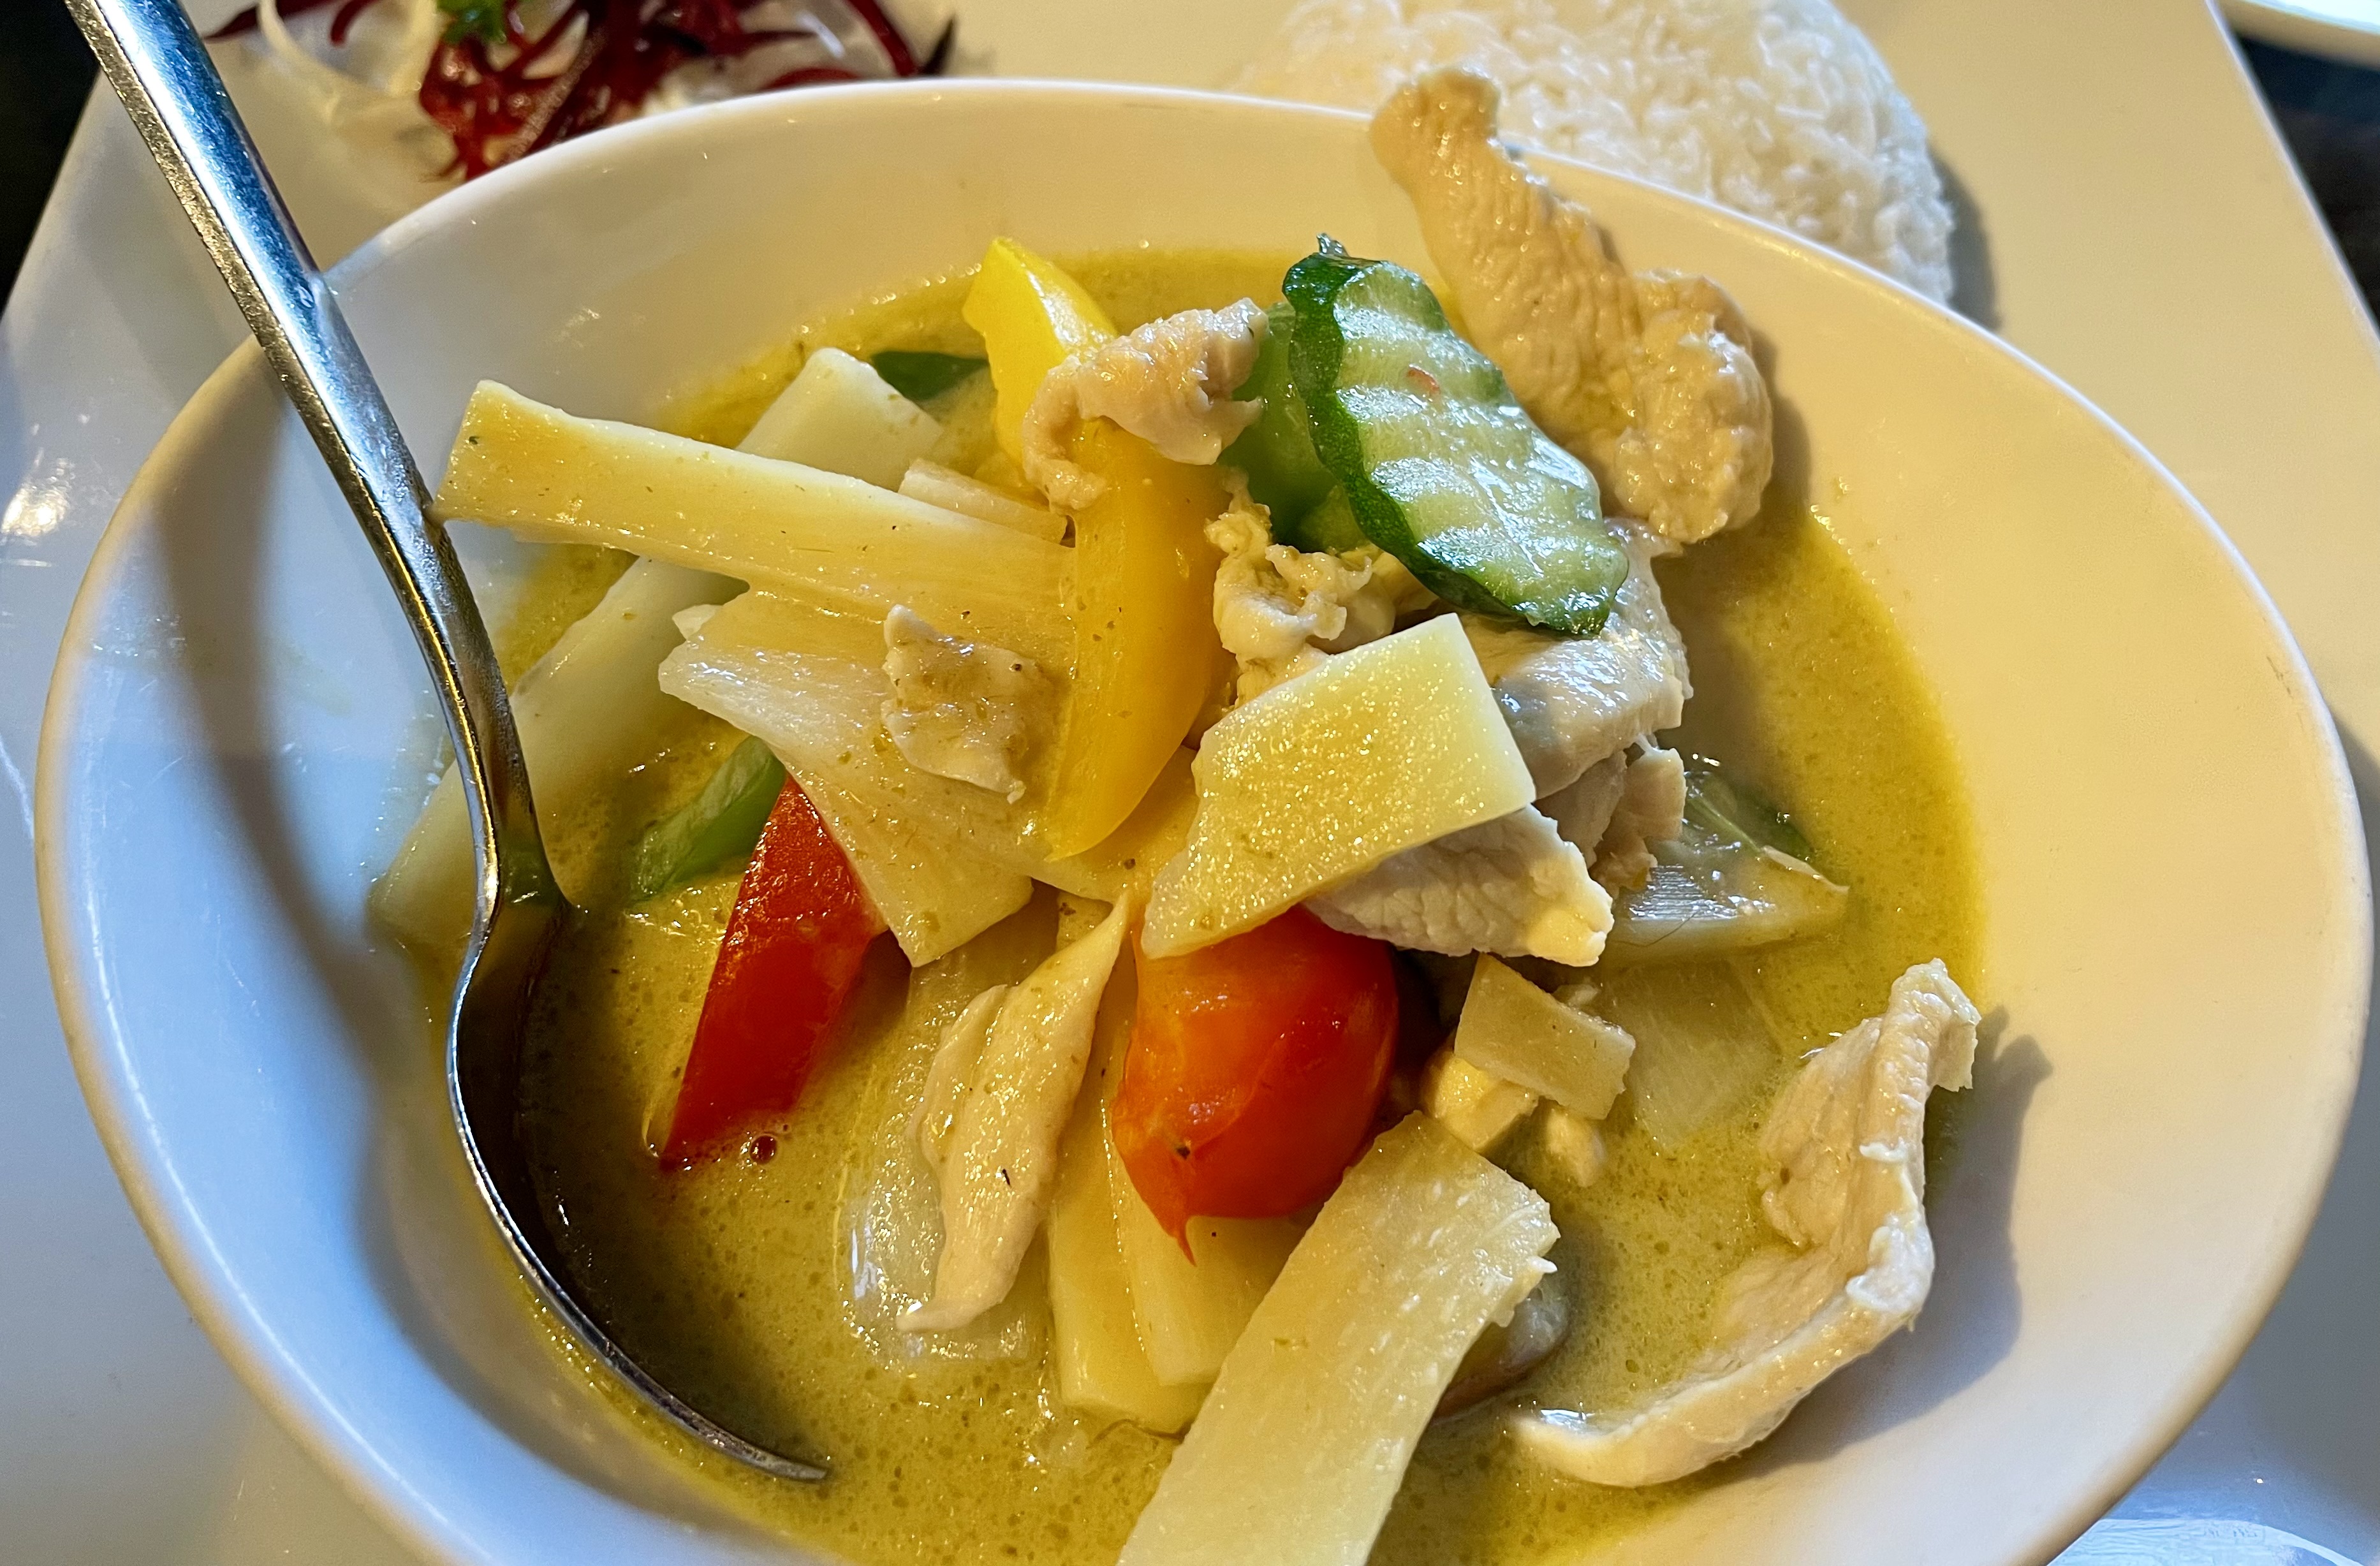 We ordered the green curry with chicken, eggplant, bamboo slices, basil leaves and bell pepper in spicy curry with coconut milk.